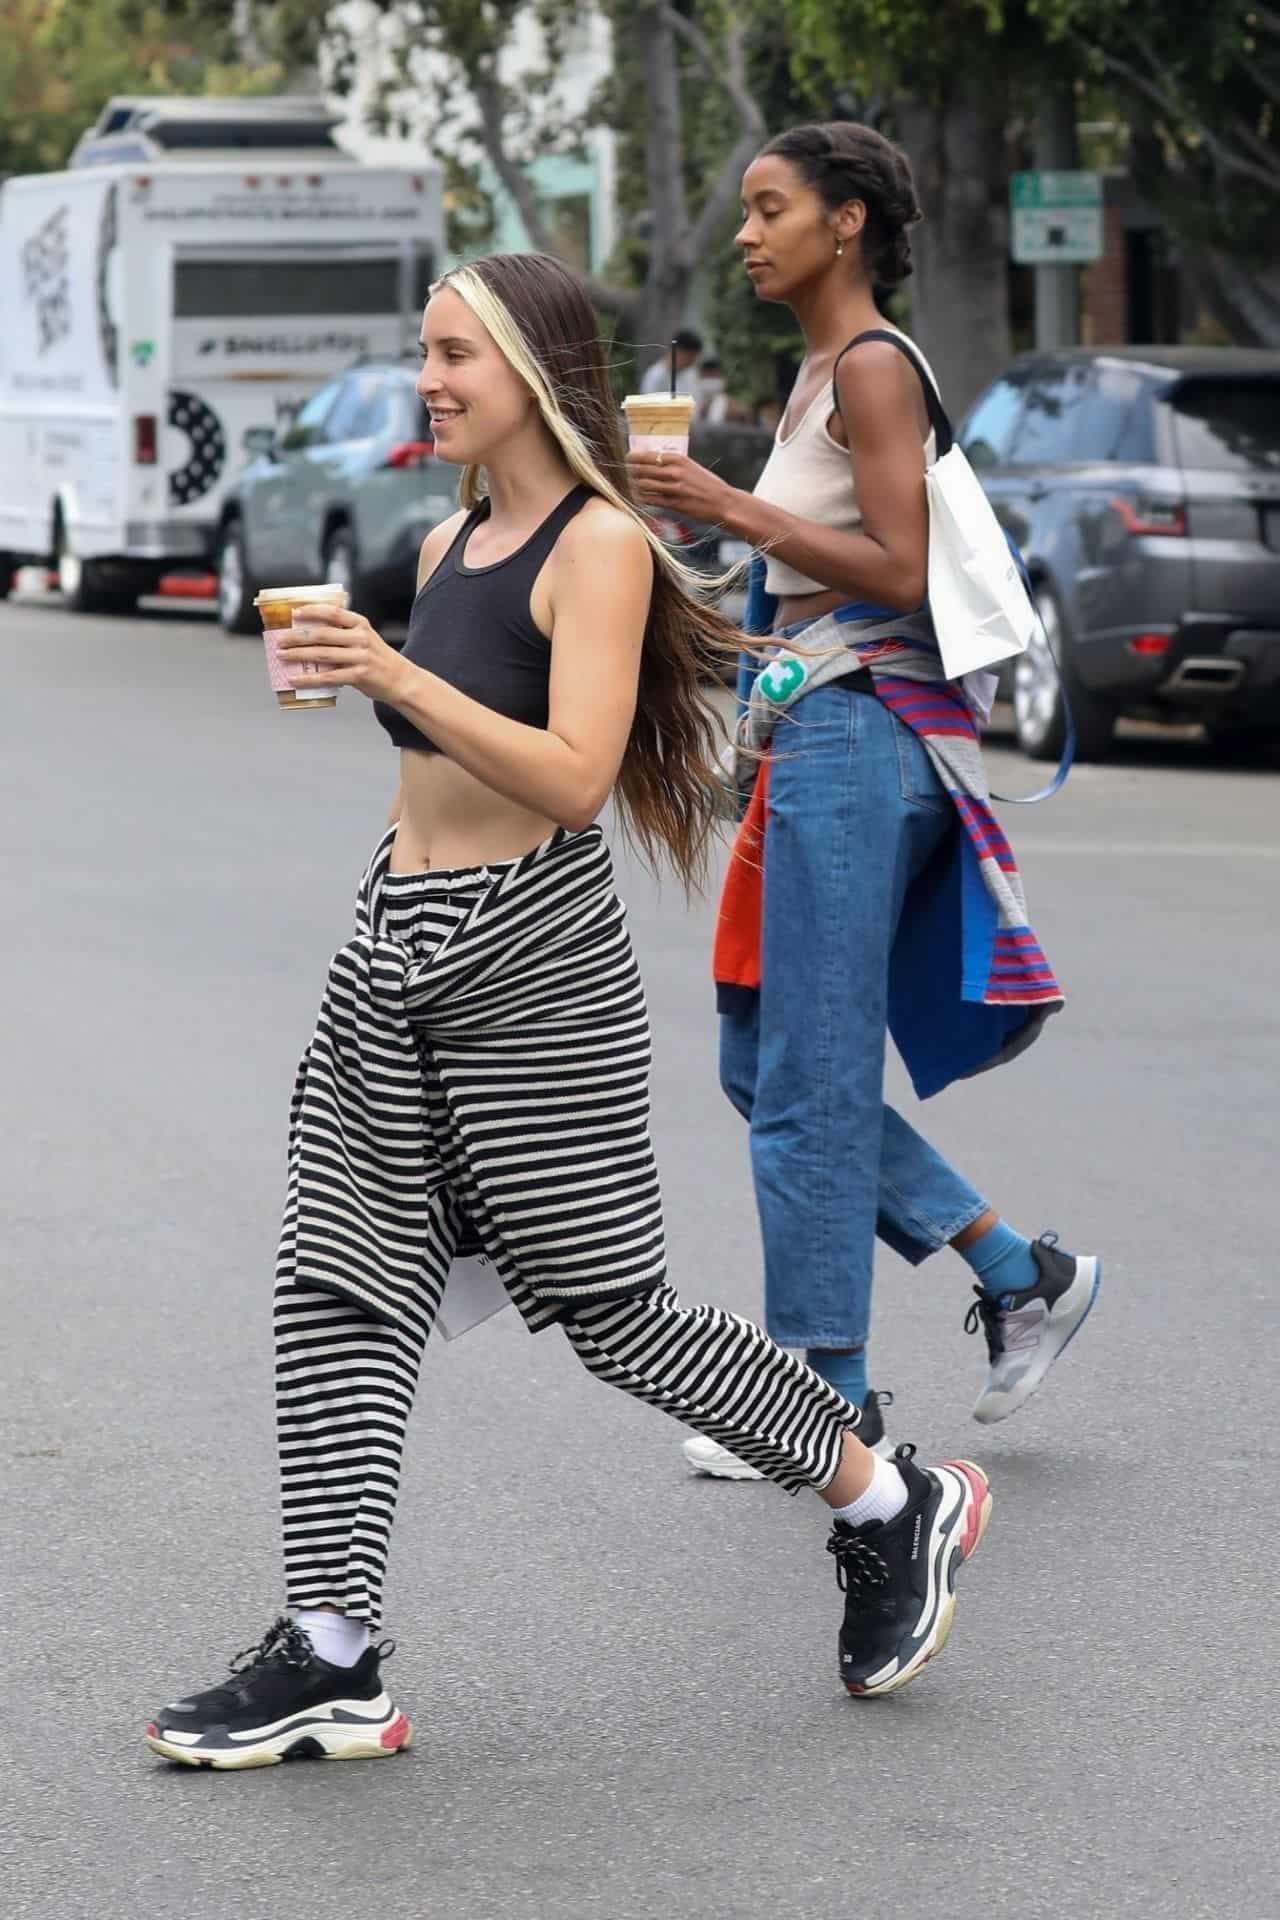 Scout Willis is Chic in Striped Pants and a Black Yoga Top in WeHo